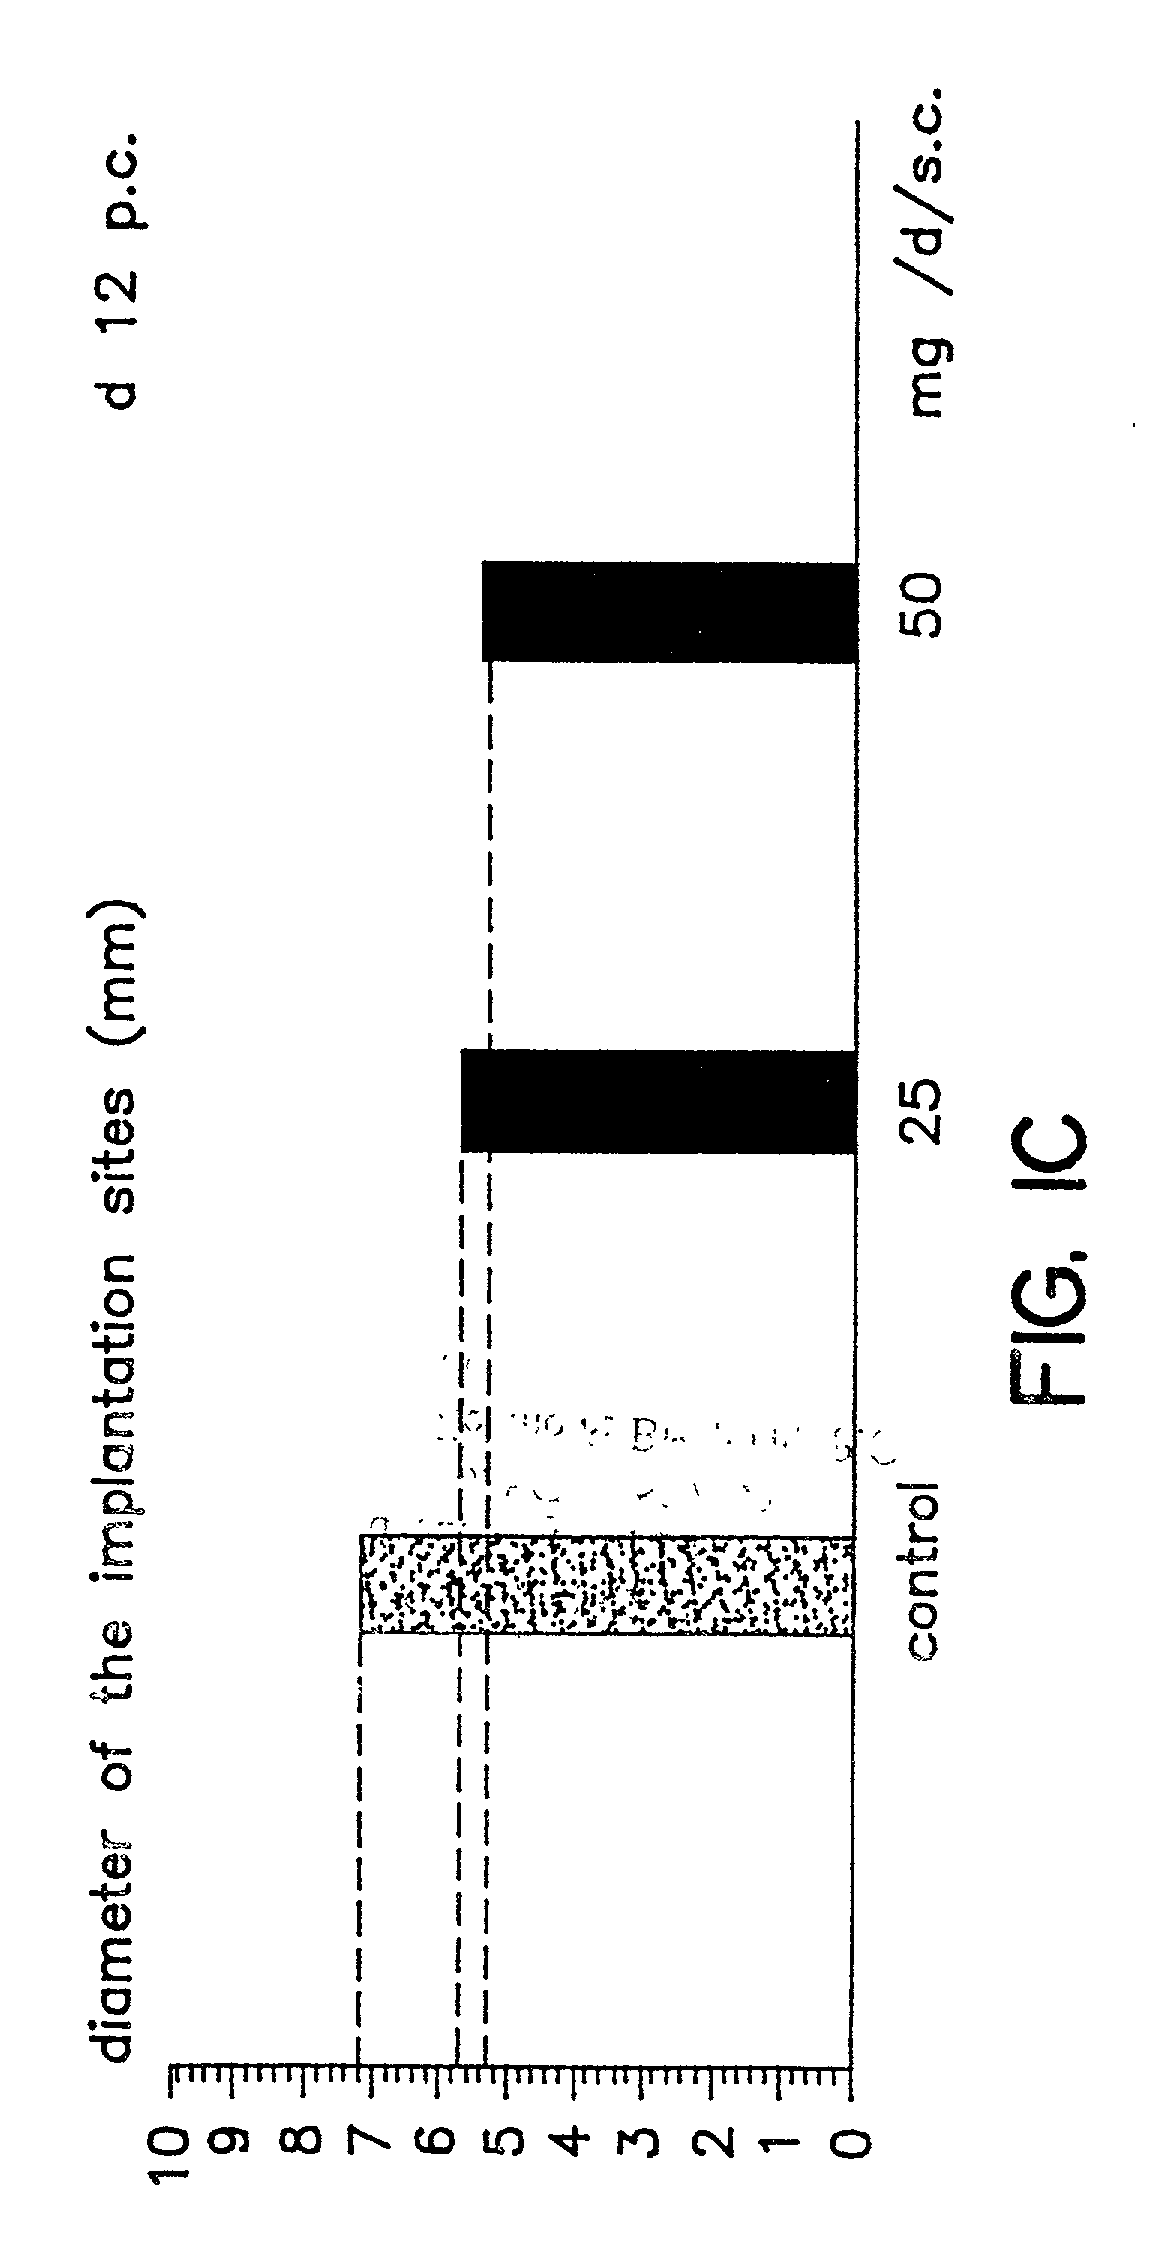 Implantation rates after in vitro fertilization, and treatment of infertility and early pregnancy loss with a nitric oxide donor or substrate alone or in combination with progesterone, and a method for contraception with nitric oxide inhibitors in combination with antiprogestins or other agents